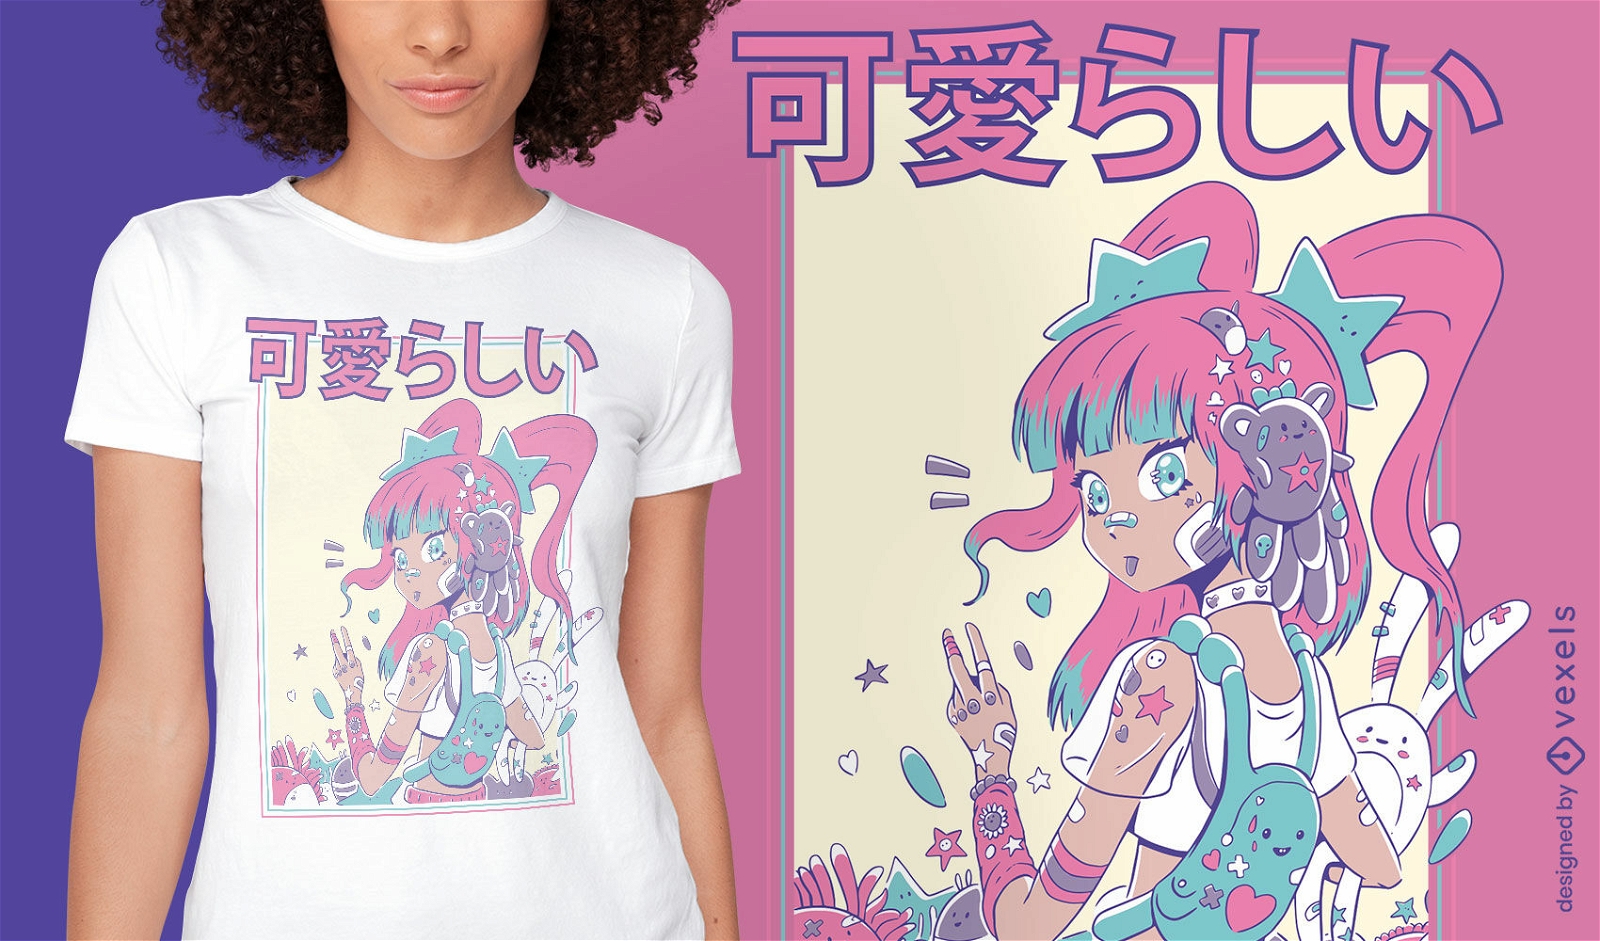 Cute anime girl with plushie toys t-shirt design